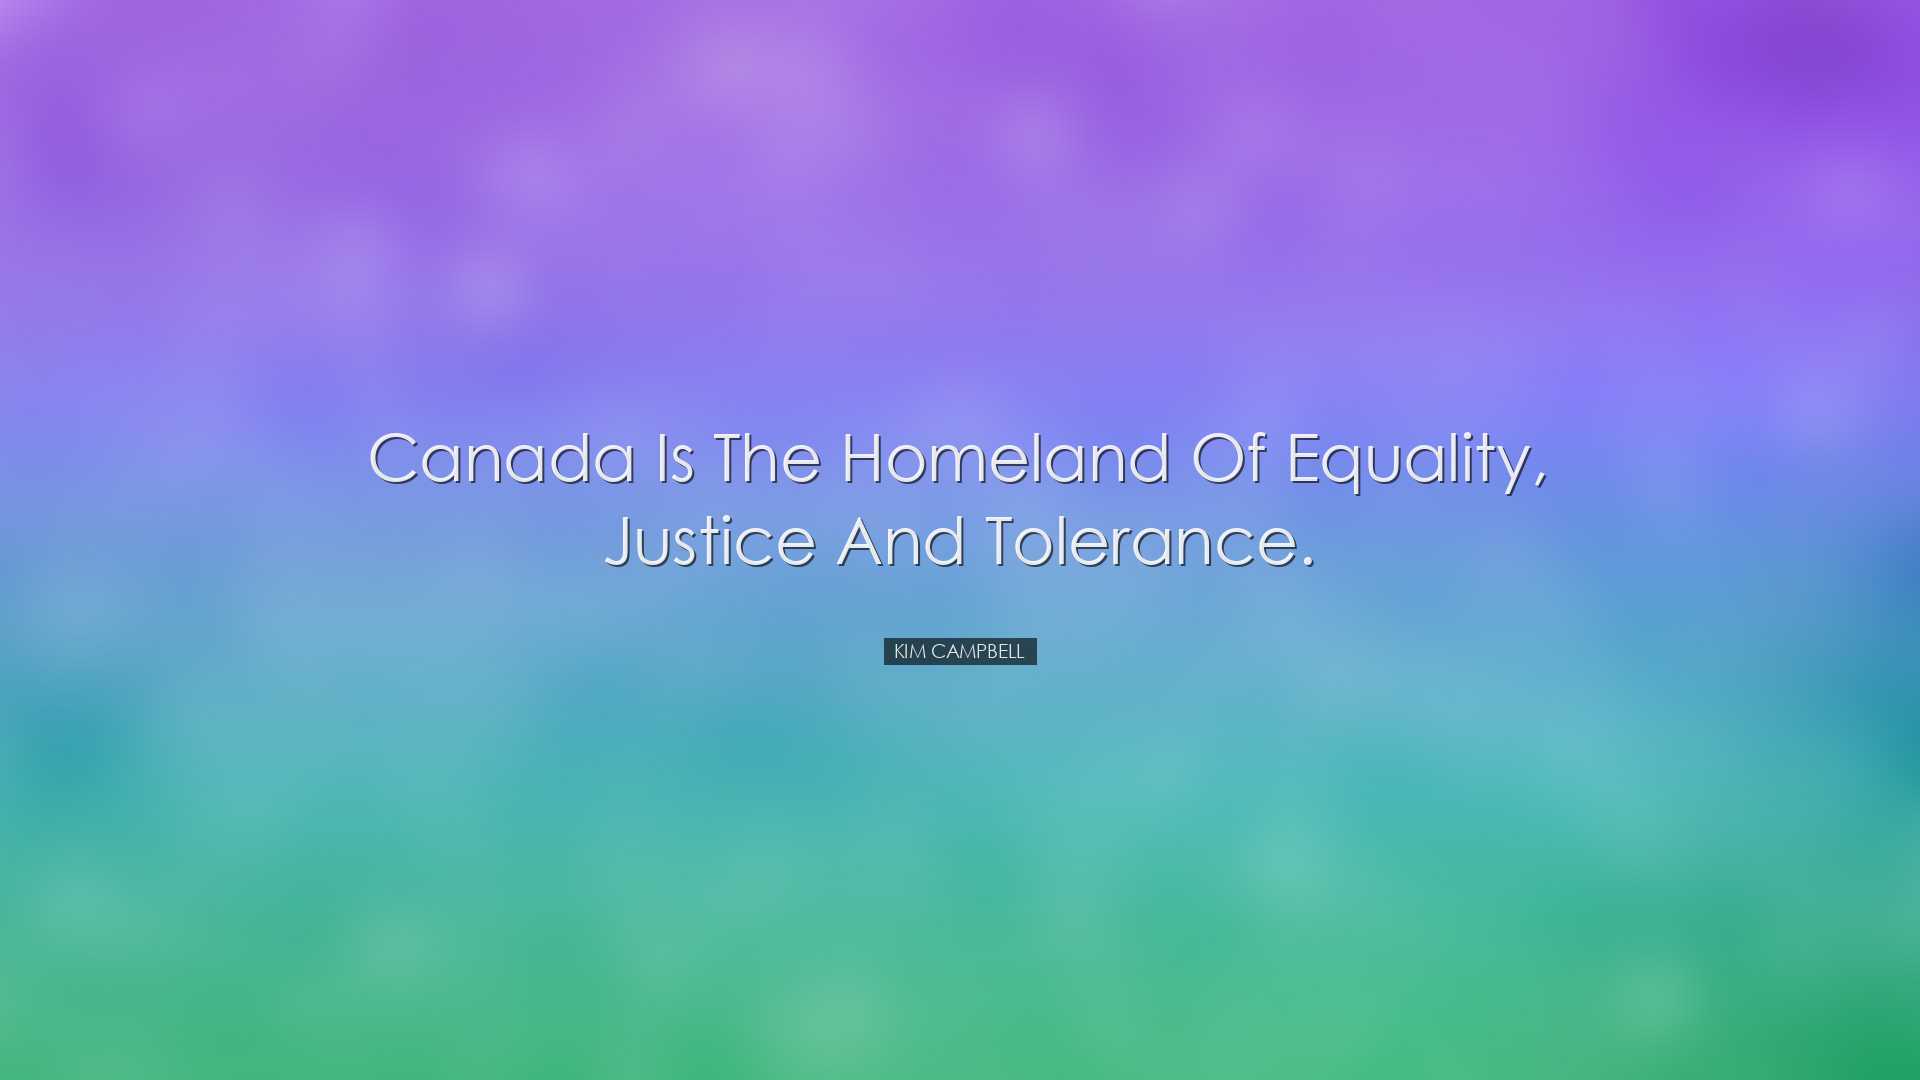 Canada is the homeland of equality, justice and tolerance. - Kim C